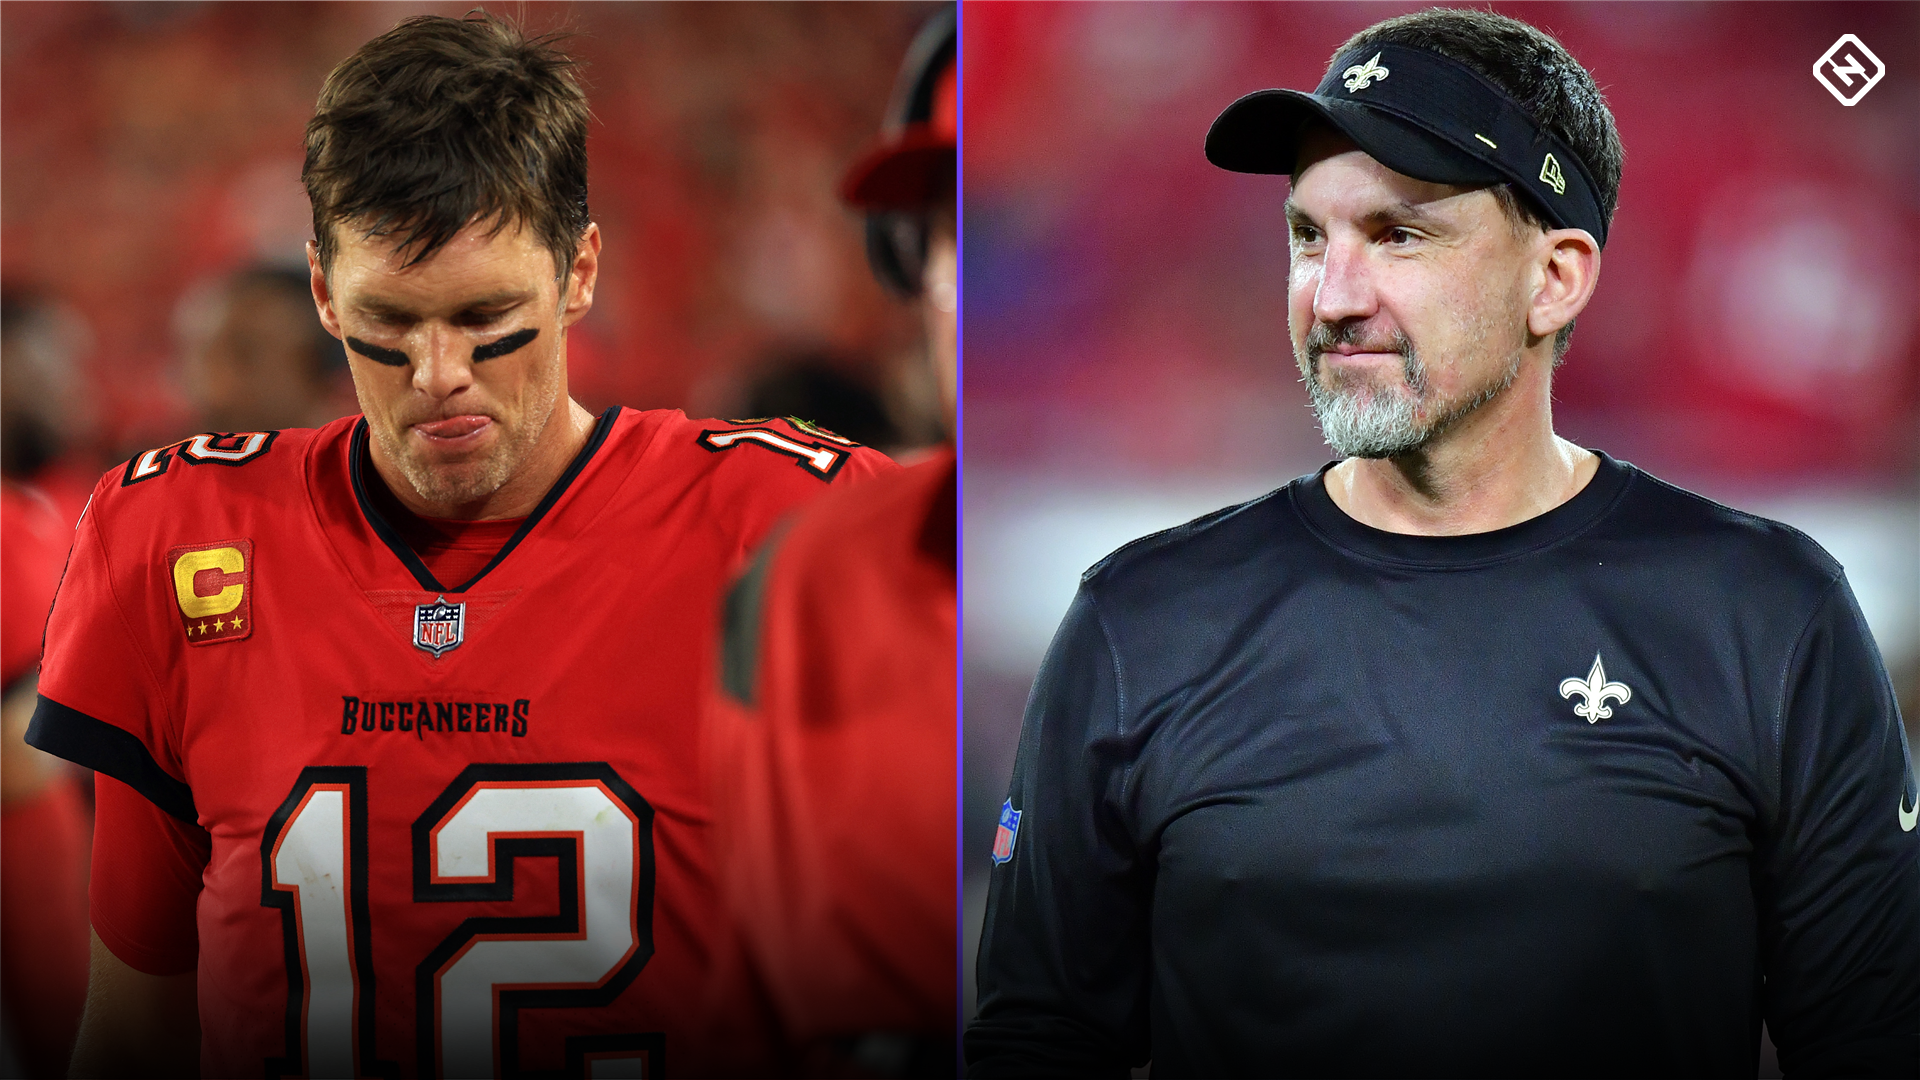 Buccaneers' Tom Brady on what he told Saints coach Dennis Allen in sideline outburst: 'Nothing, just football'